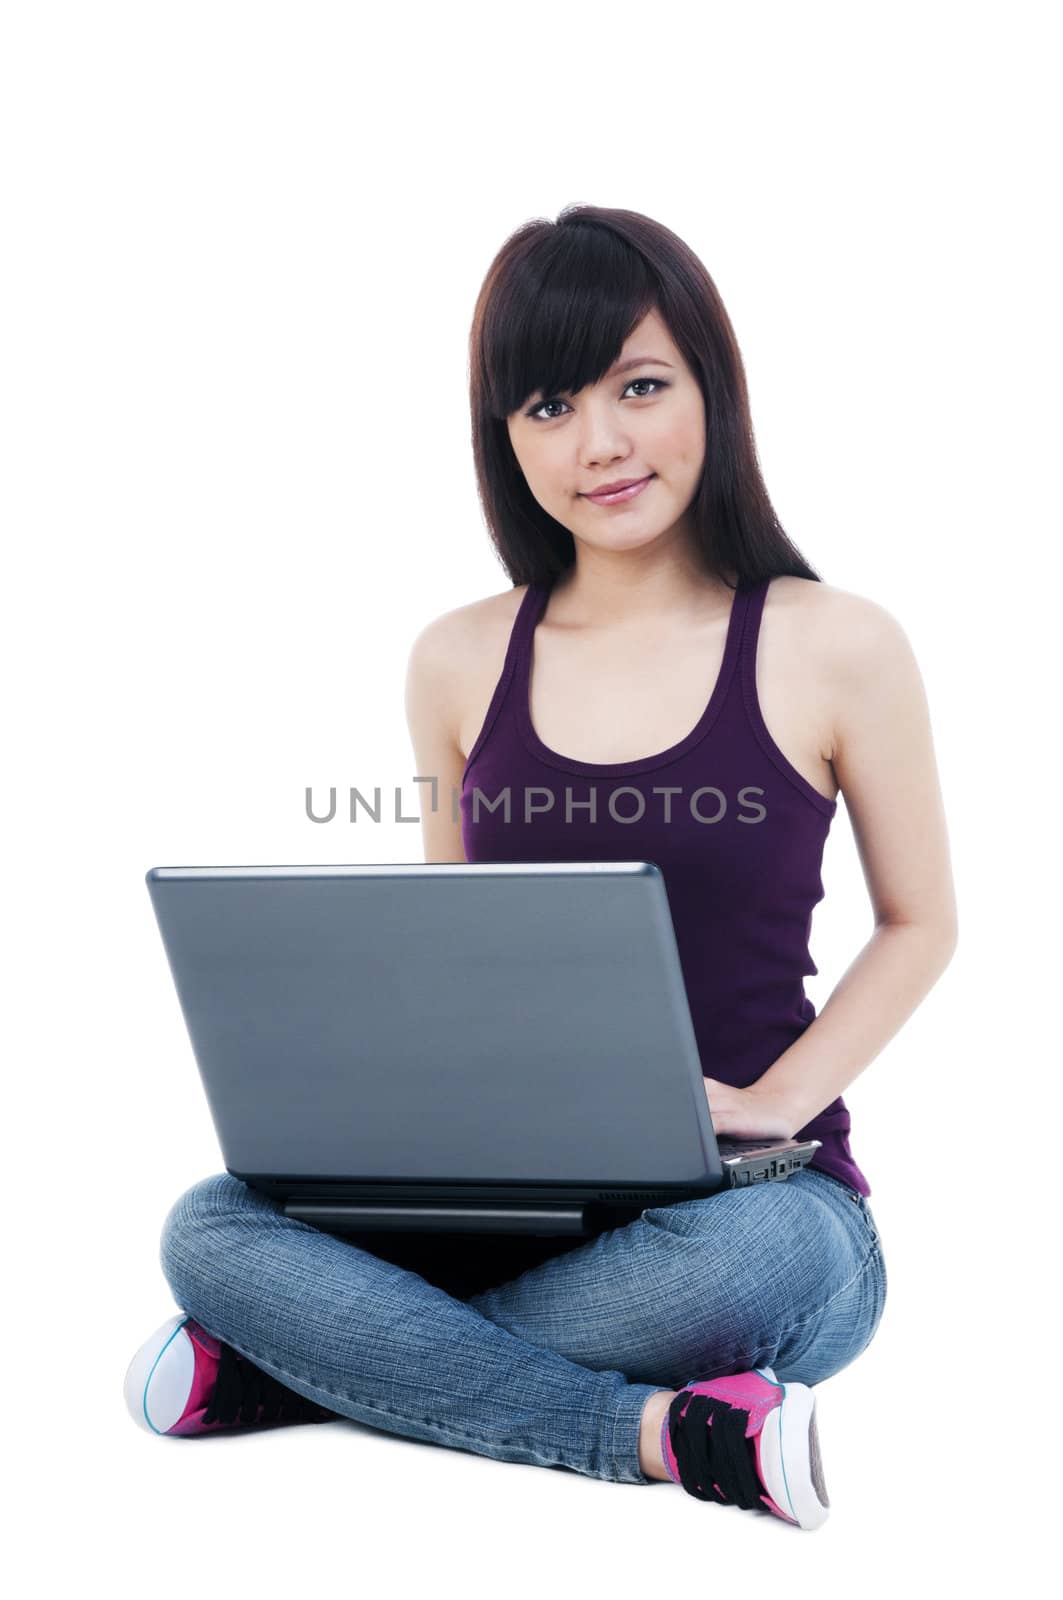 Portrait of an attractive girl sitting on floor using laptop over white background.